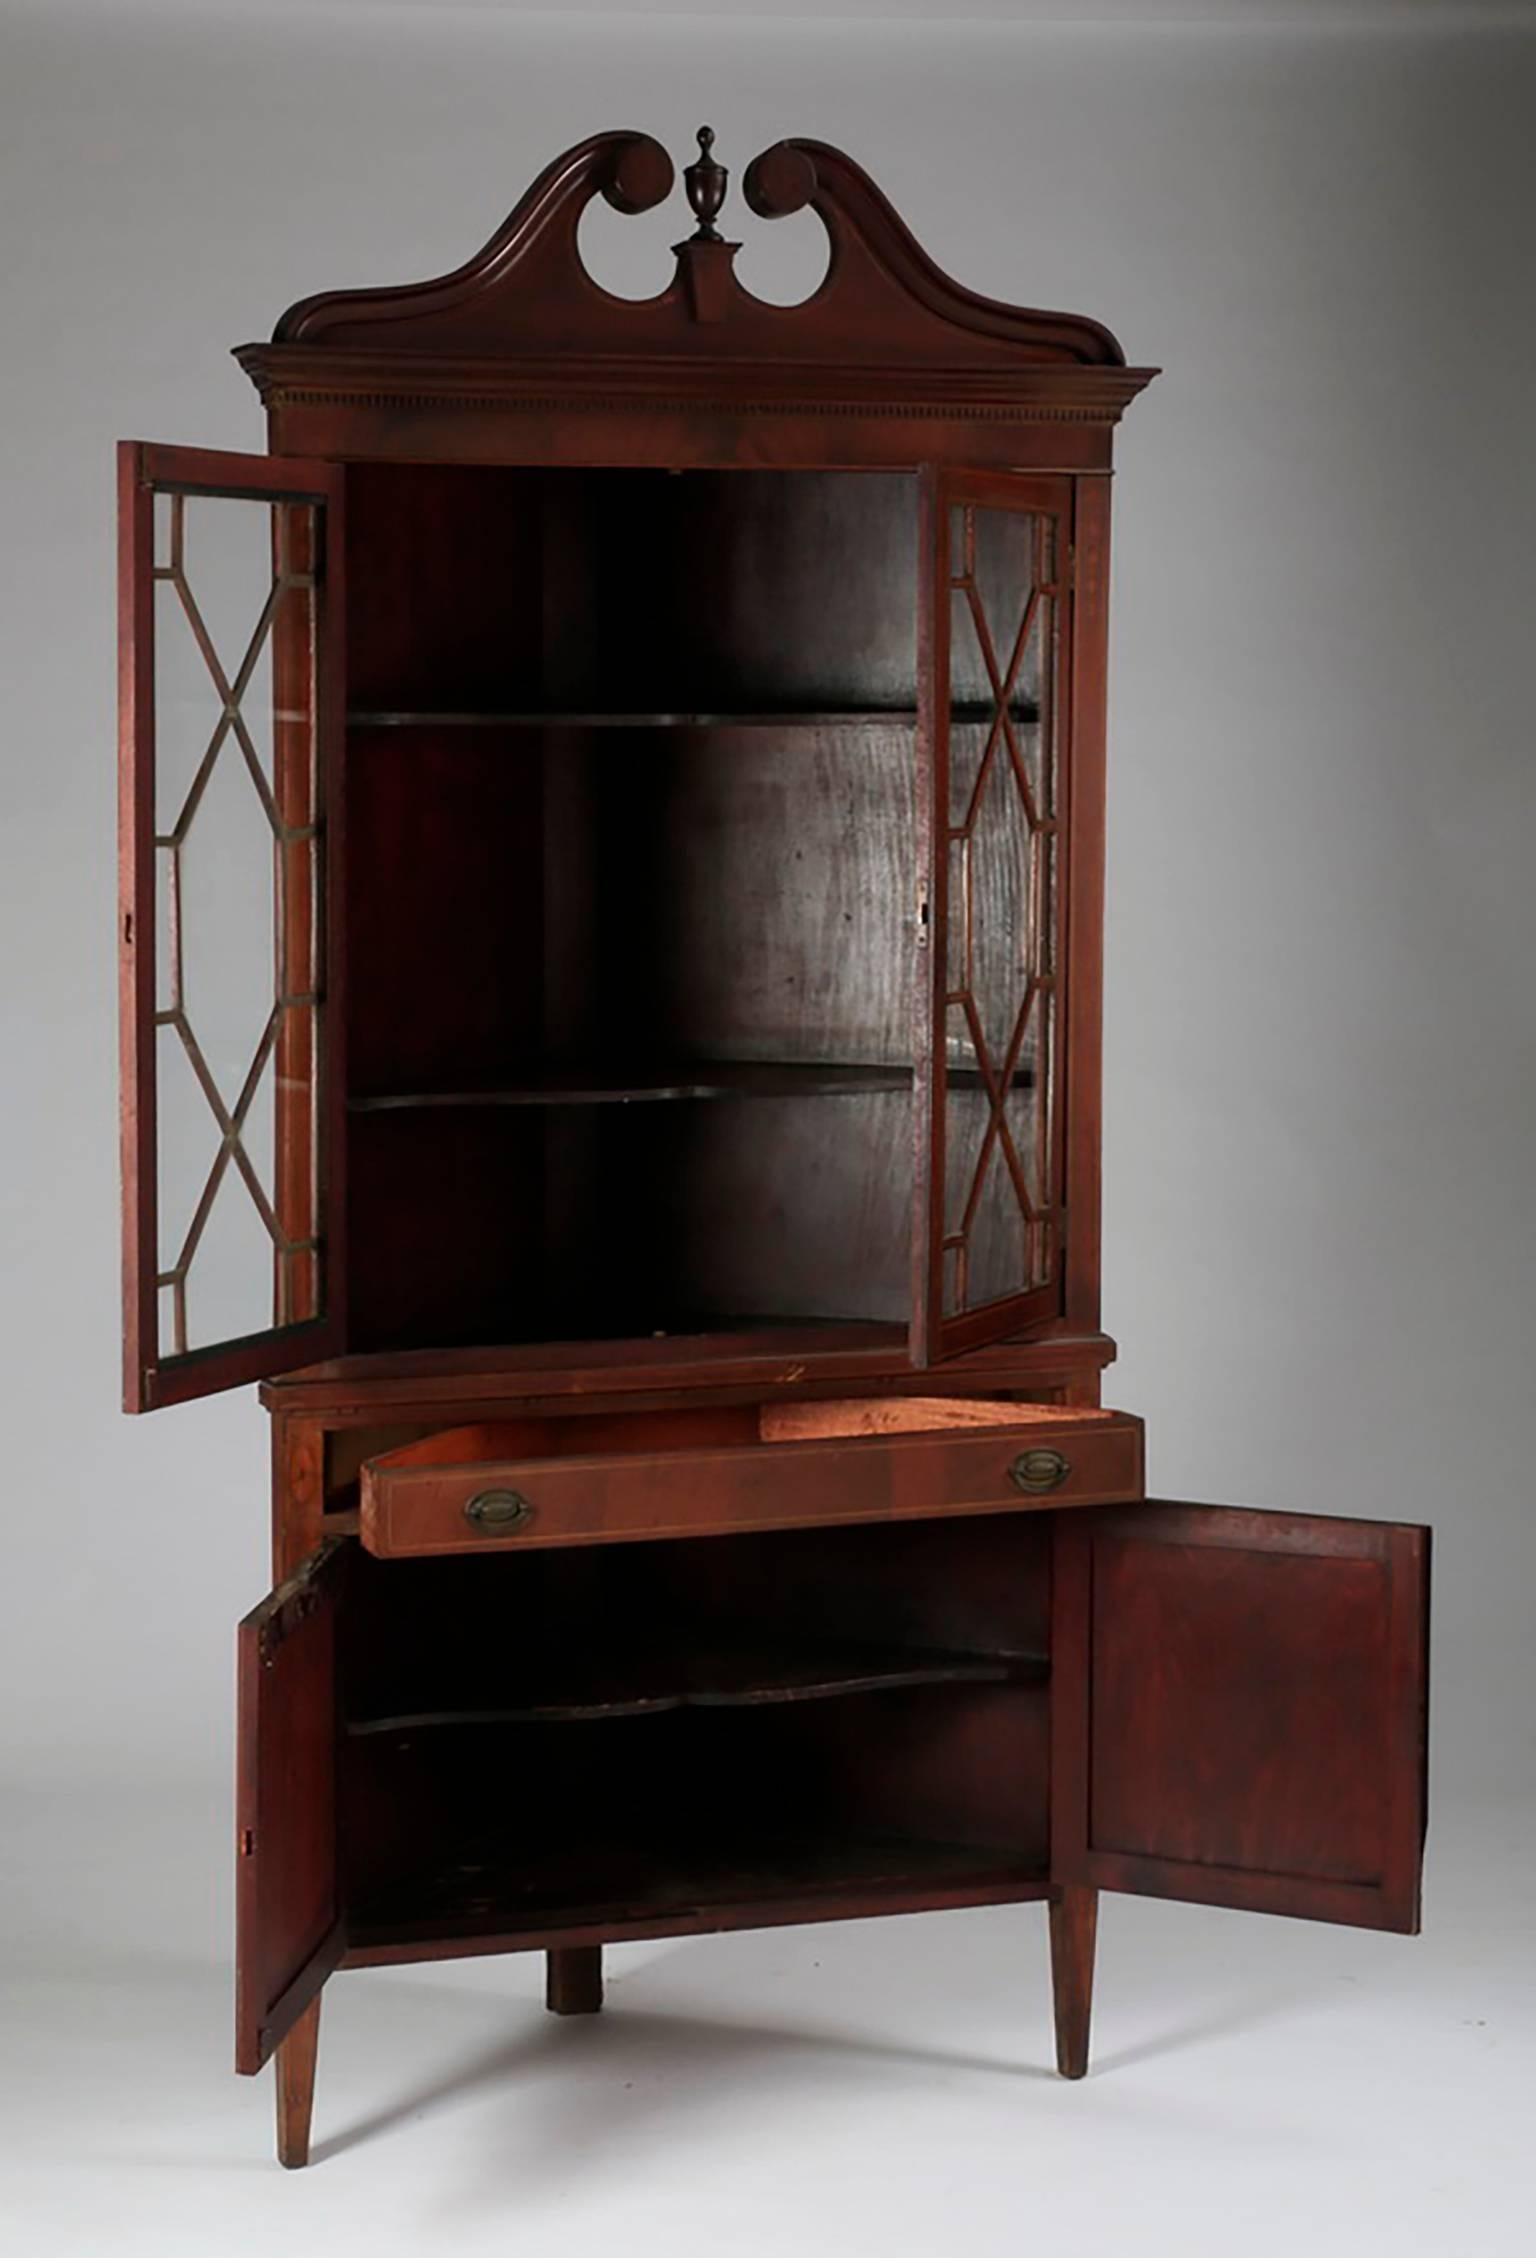 Antique American Georgian style mahogany double door corner cabinet. It has an arch pediment with marquetry inlaid decoration above the stepped rectangular top surmounting two glass doors that open to reveal three display shelves. There is one long